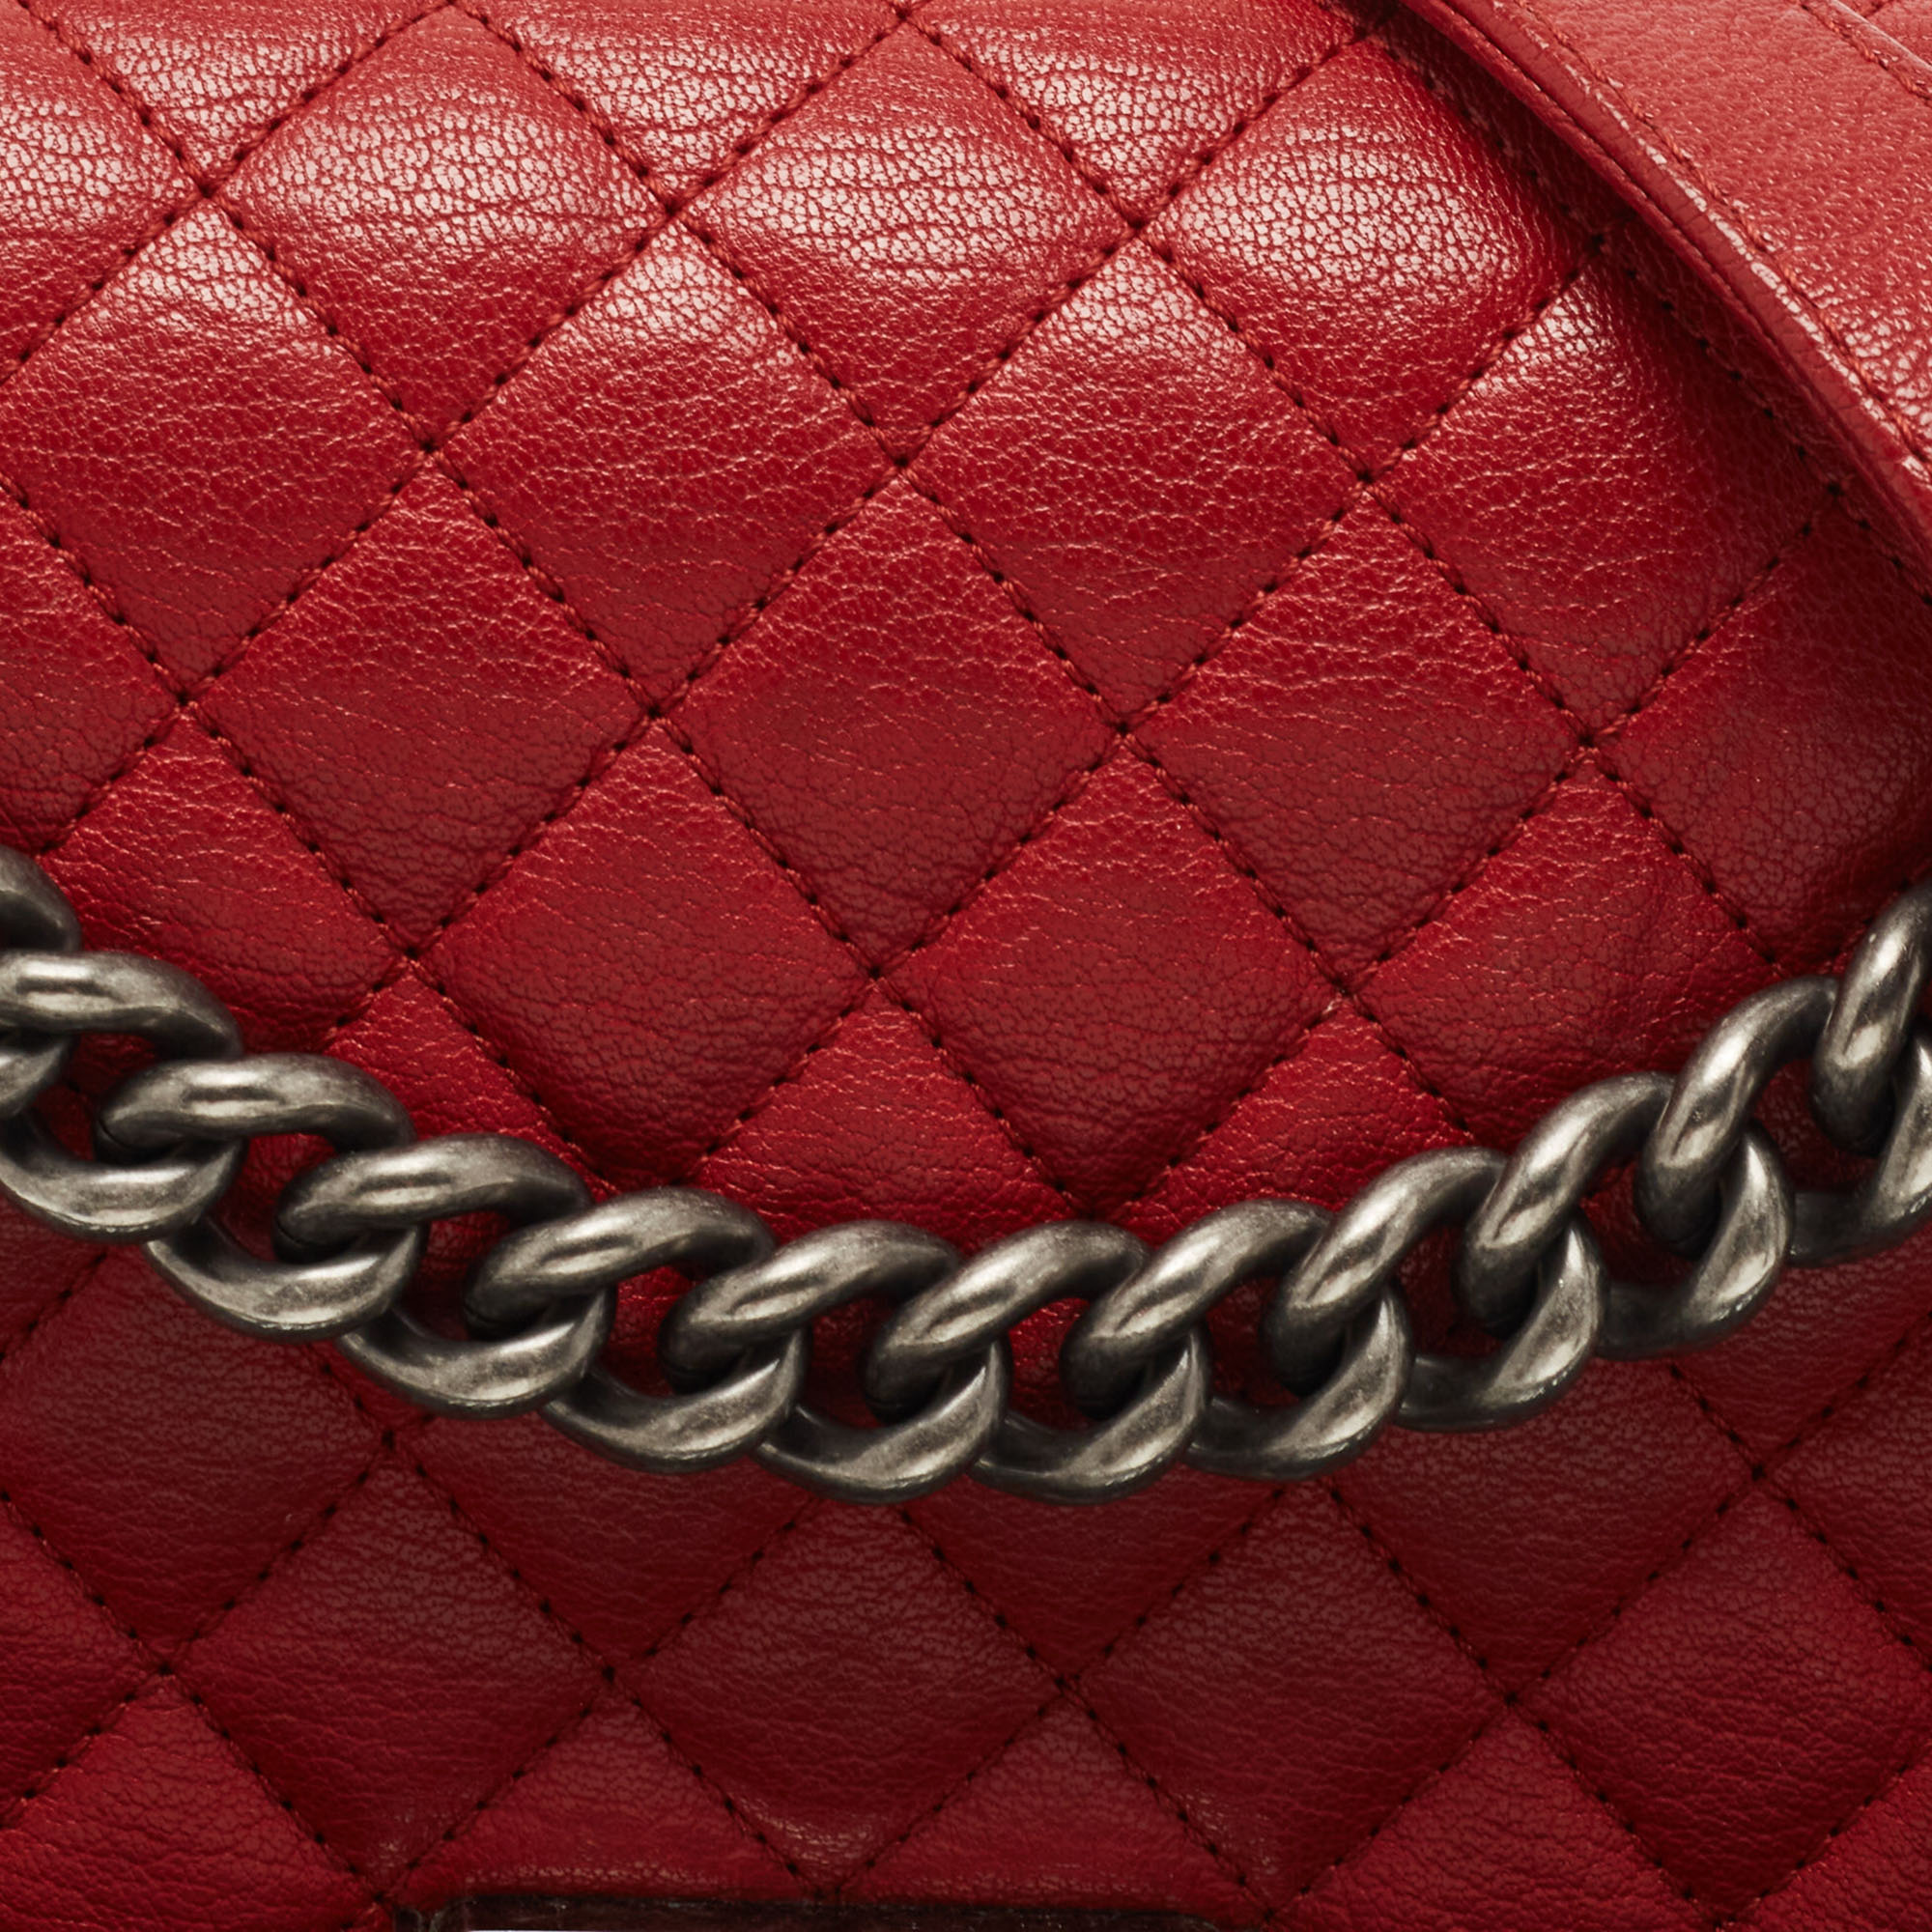 Chanel Red Quilted Leather And Patent Medium Boy Flap Bag